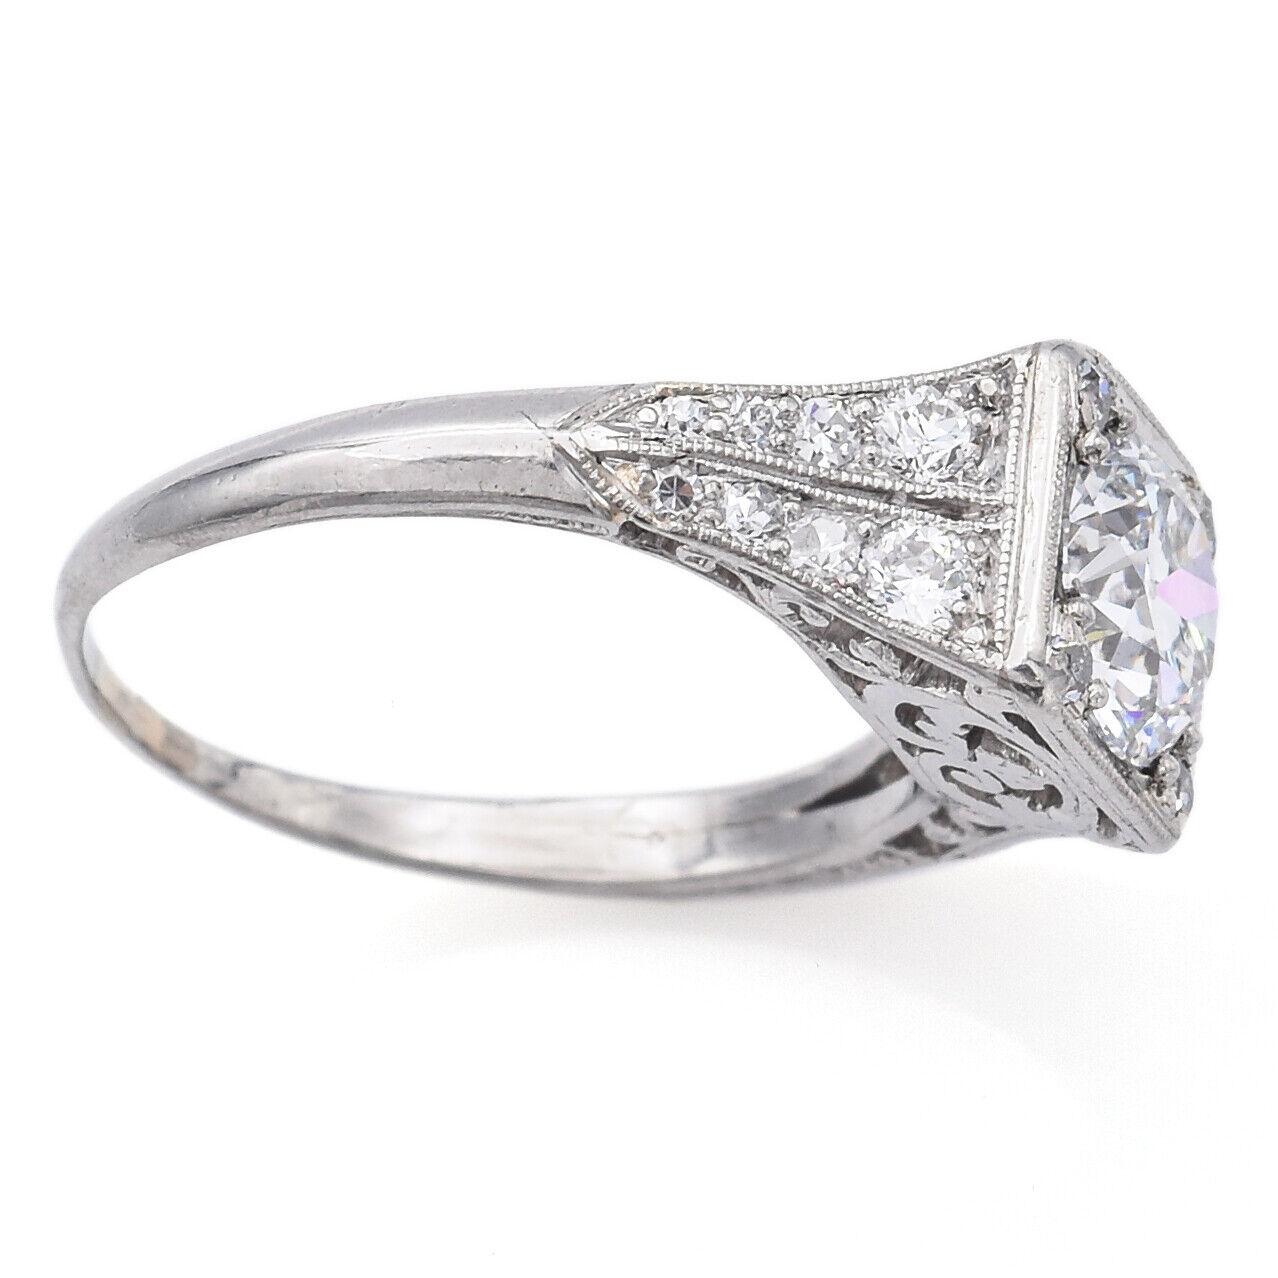 Antique 1.28 TCW Diamond Platinum Band Ring Size 5 In Good Condition For Sale In New York, NY